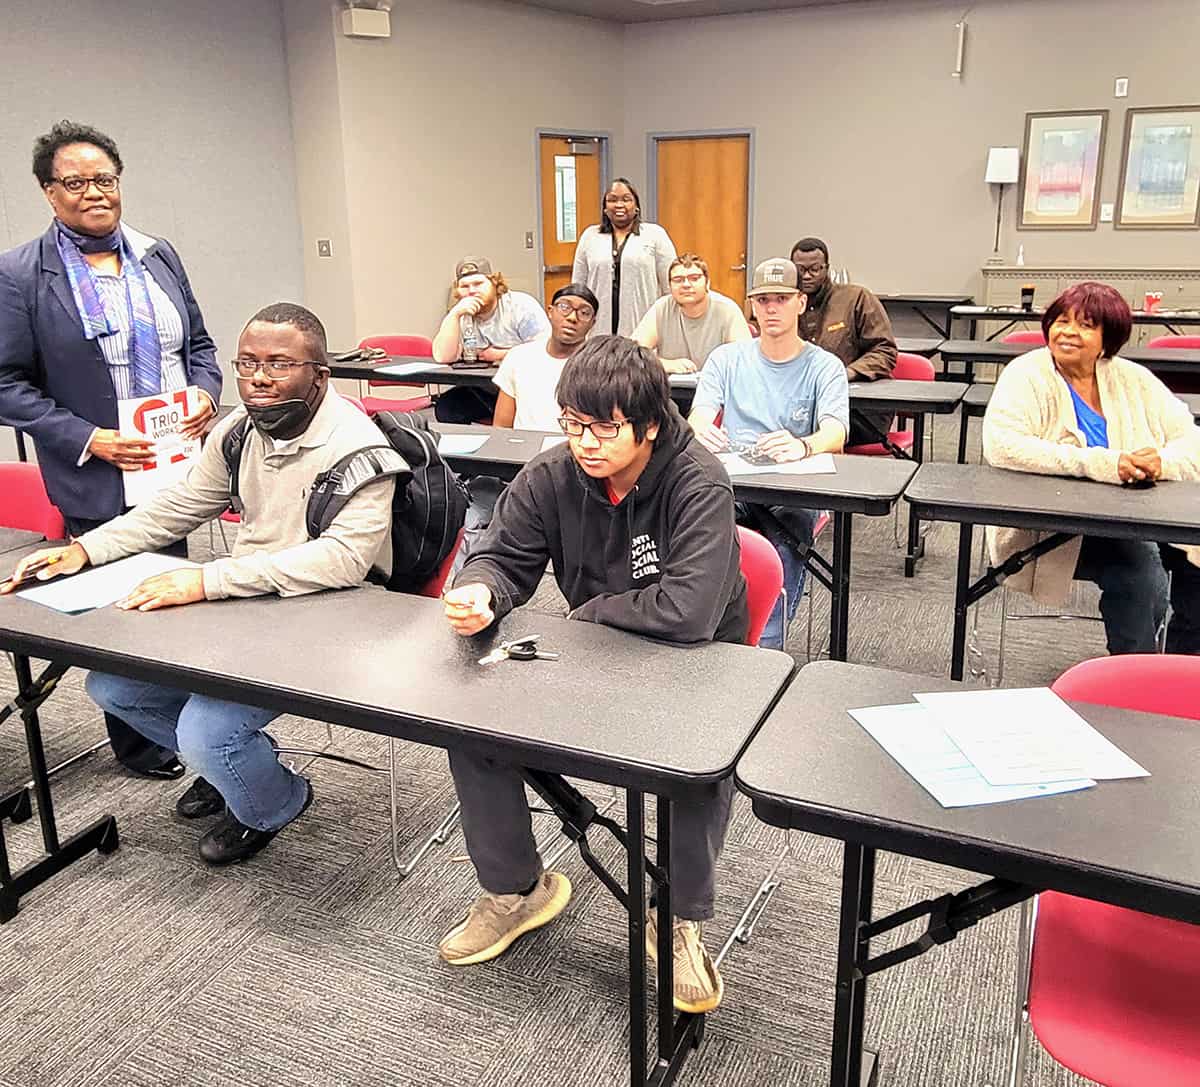 Valerie Hicks (standing, left) of the Mercer University Educational Opportunity Center taught students about financial literacy in a recent workshop at the South Georgia Technical College Crisp County Center.